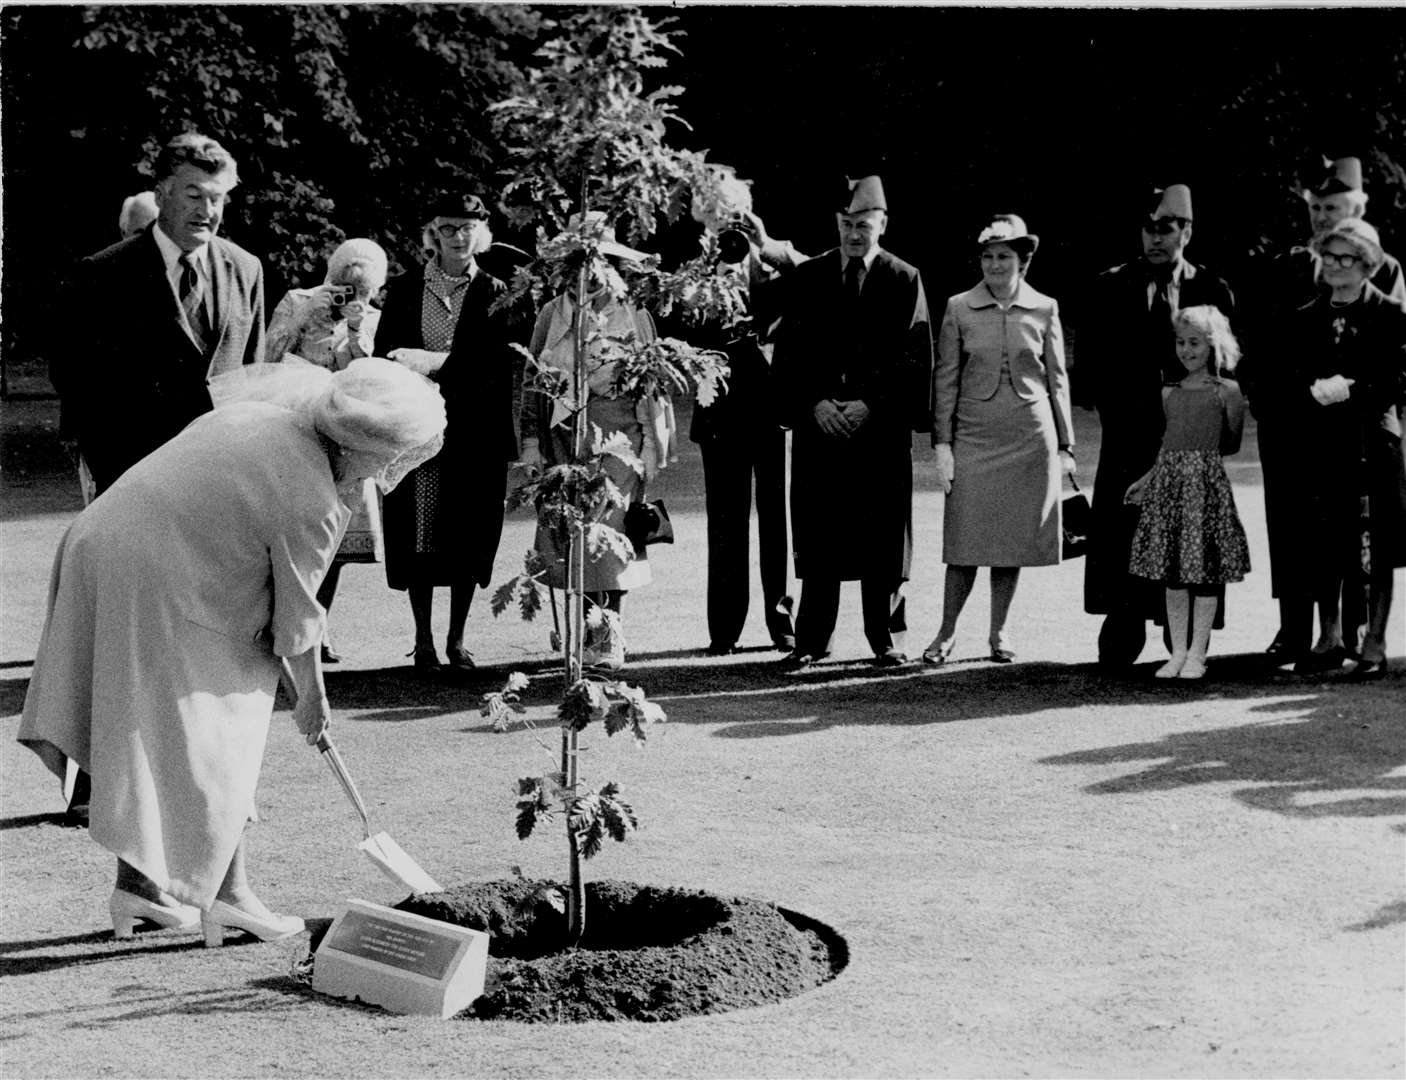 The Queen Mother plants a tree at Walmer Castle to commemorate her acceptance of the invitation to become Lord Warden of the Cinque Ports in 1979